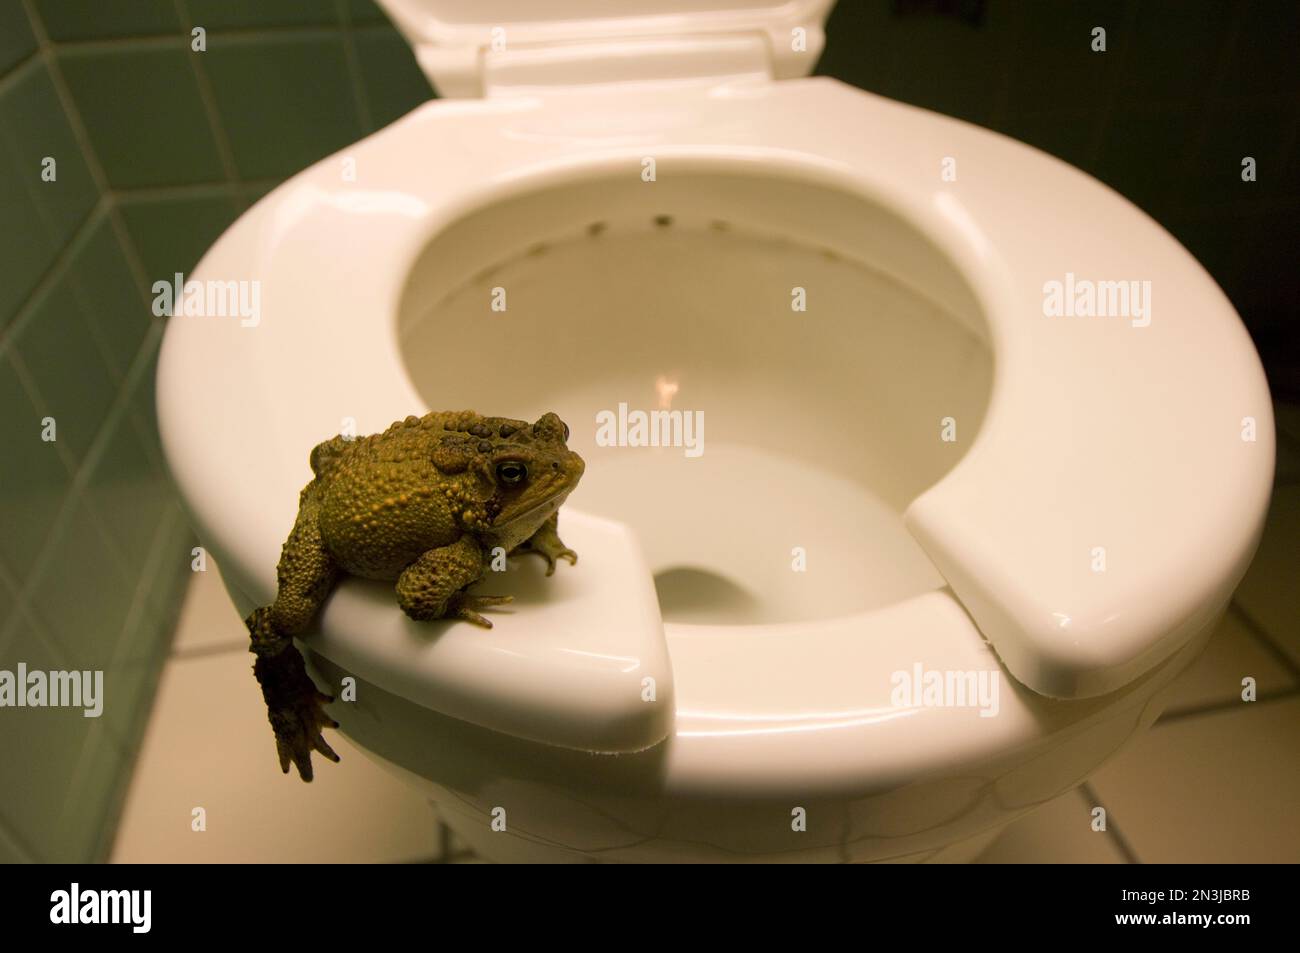 Eastern American toad (Anaxyrus americanus americanus) on the toilet seat in a motel room bathroom; Watertown, New York, United States of America Stock Photo